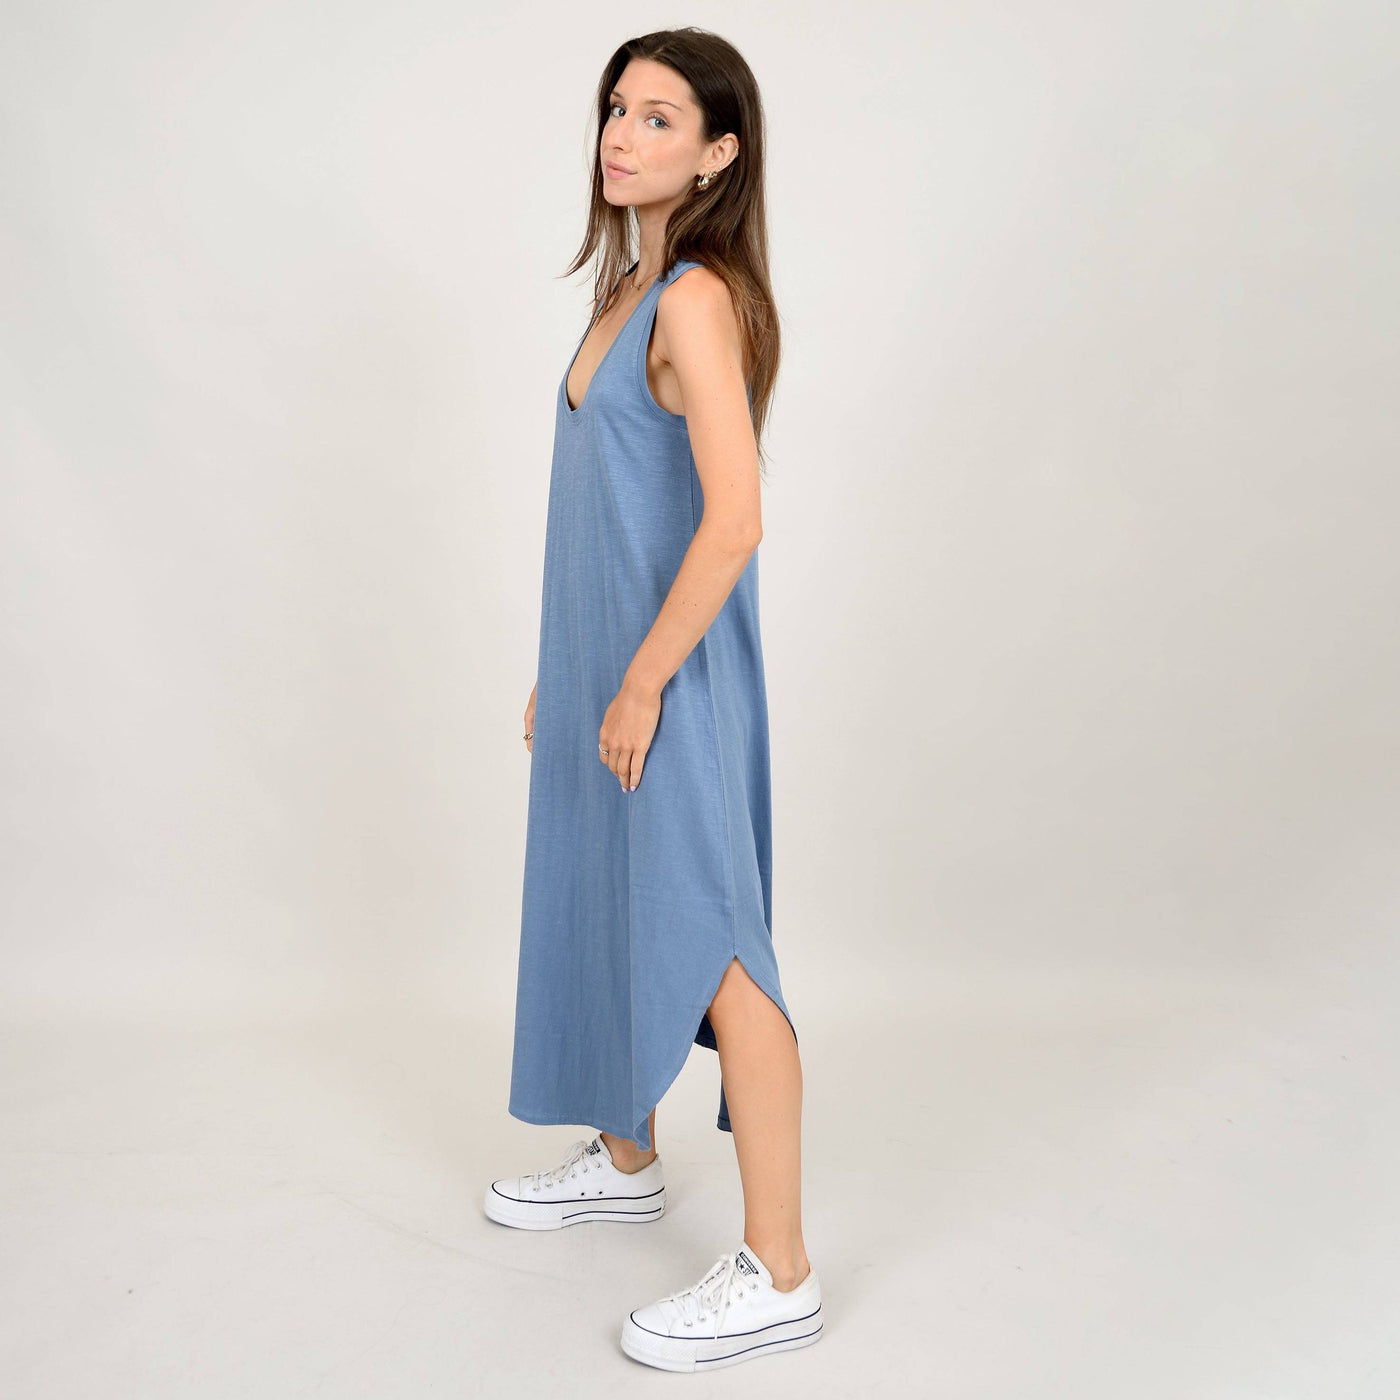 Sky Scoop Neck | Tank Dress - The Local Space